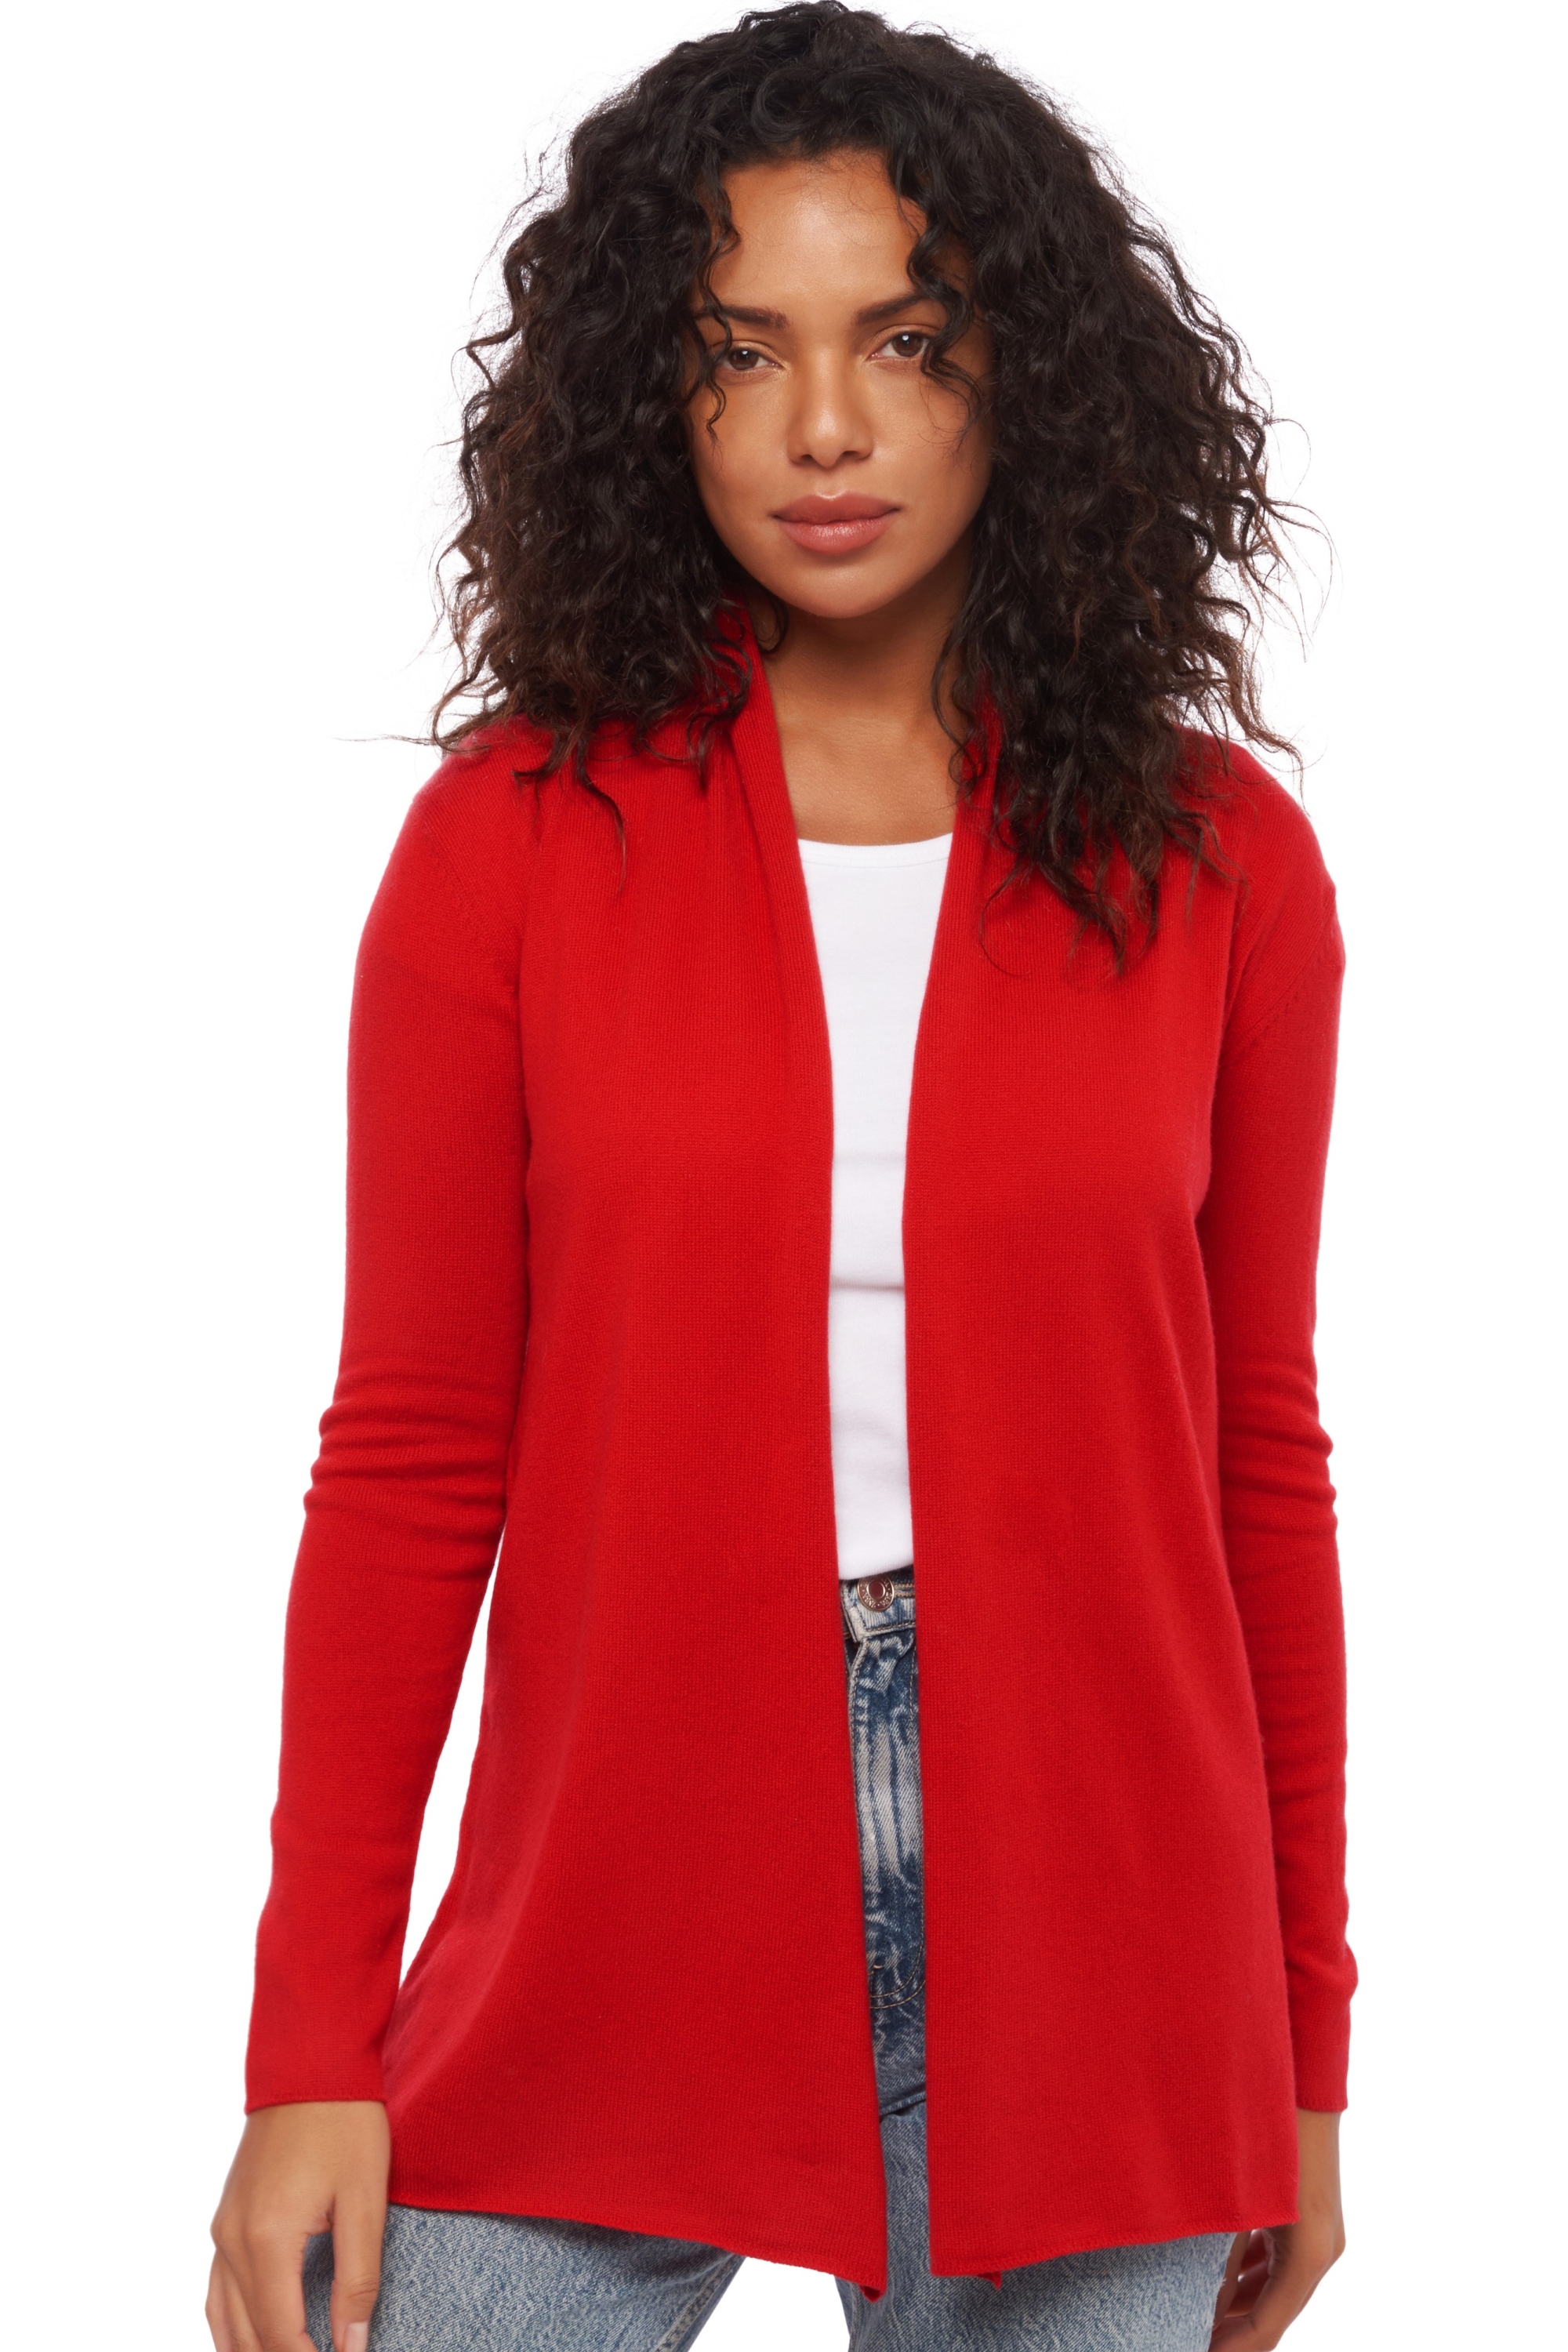 Cashmere ladies cardigans pucci blood red 3xl